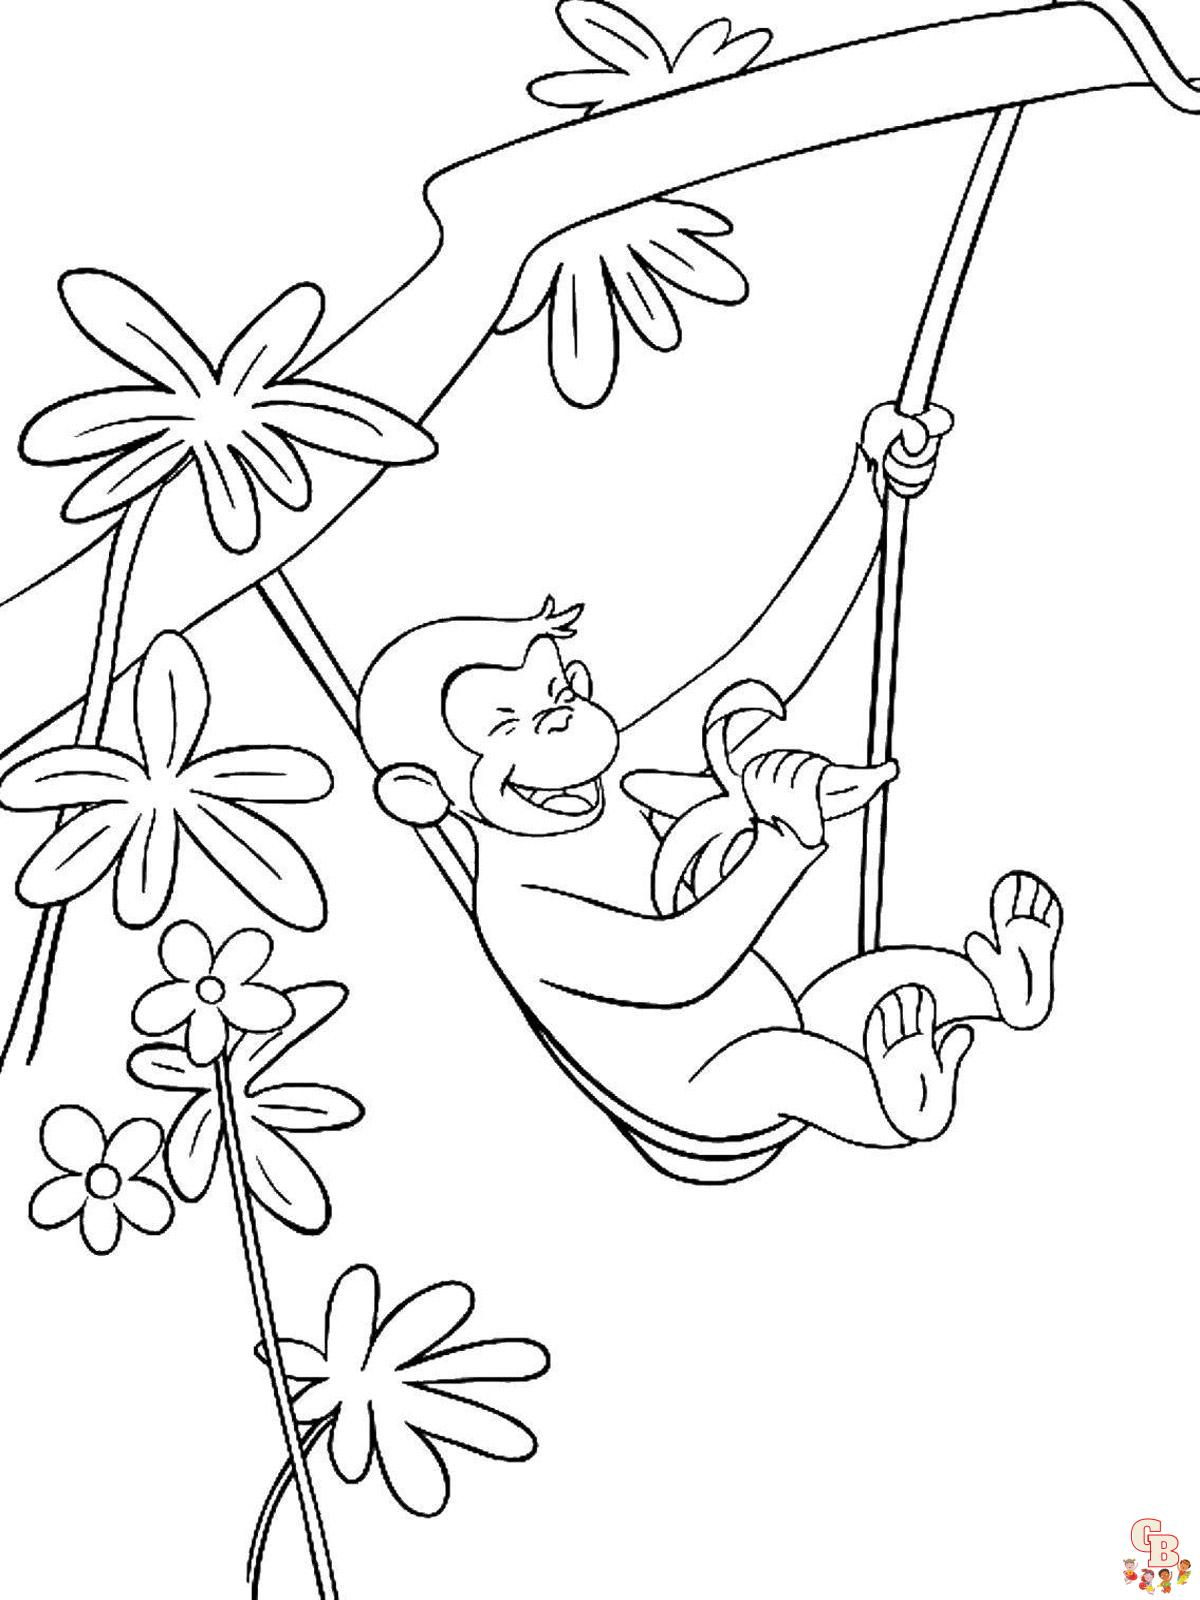 Apes Coloring Pages 26